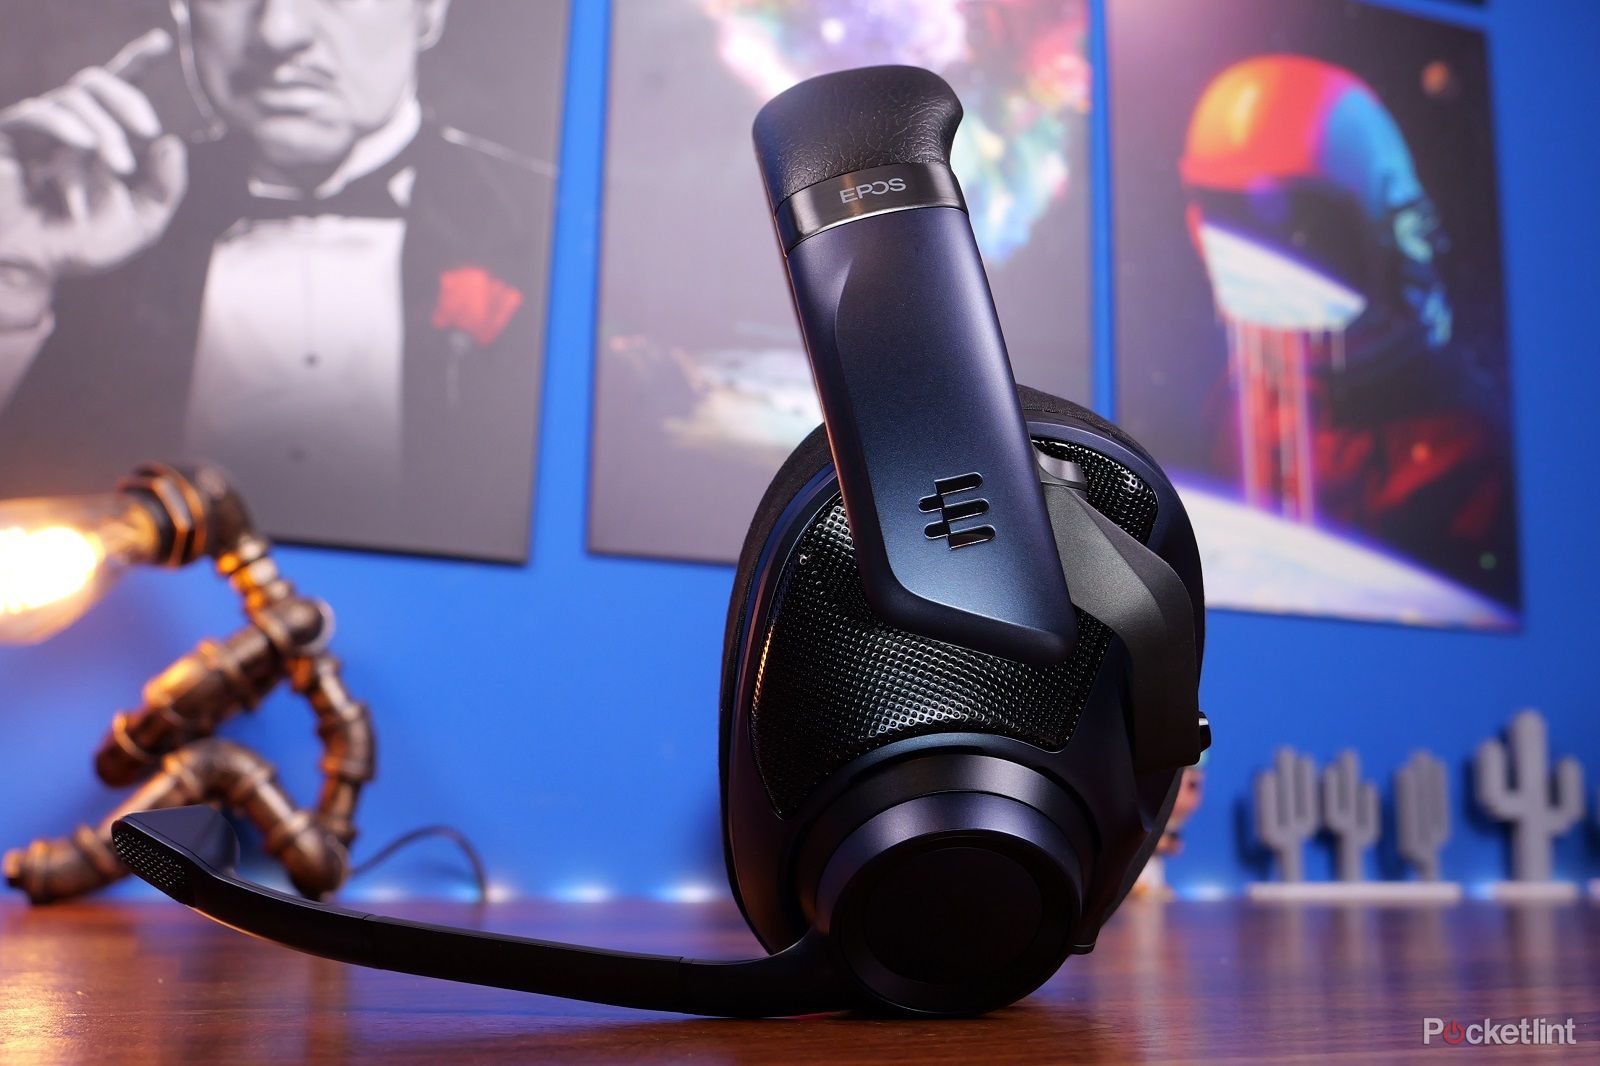 EPOS H6 Pro Review: An affordable headset with a luxury feel